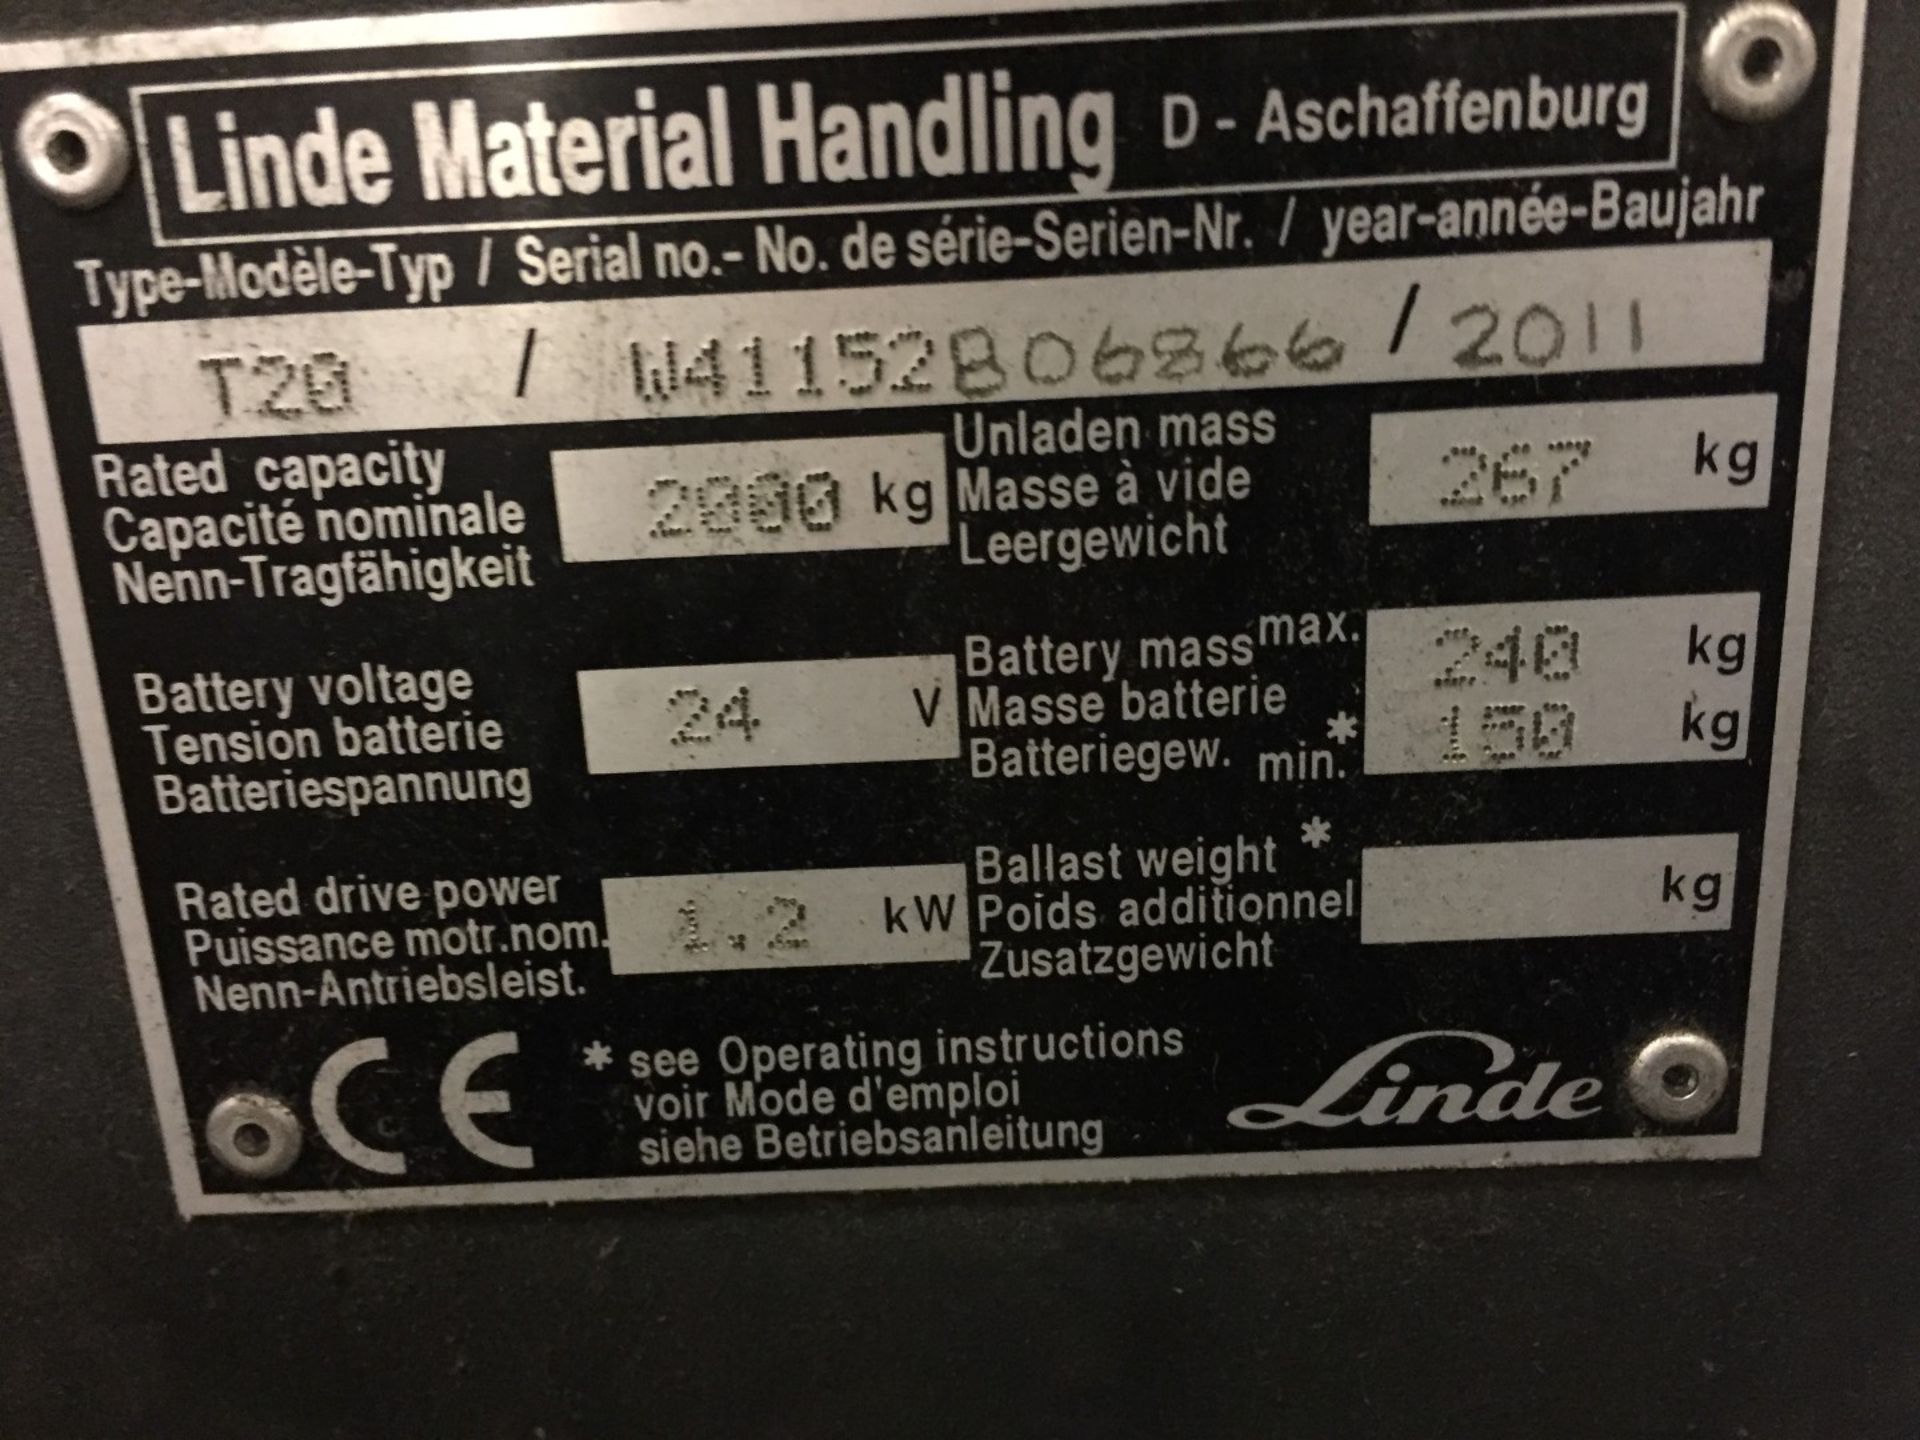 1 x Linde T20 Electric Pallet Truck - Tested and Working - Charger Included - CL007 - Ref: T20/1 - - Image 12 of 12